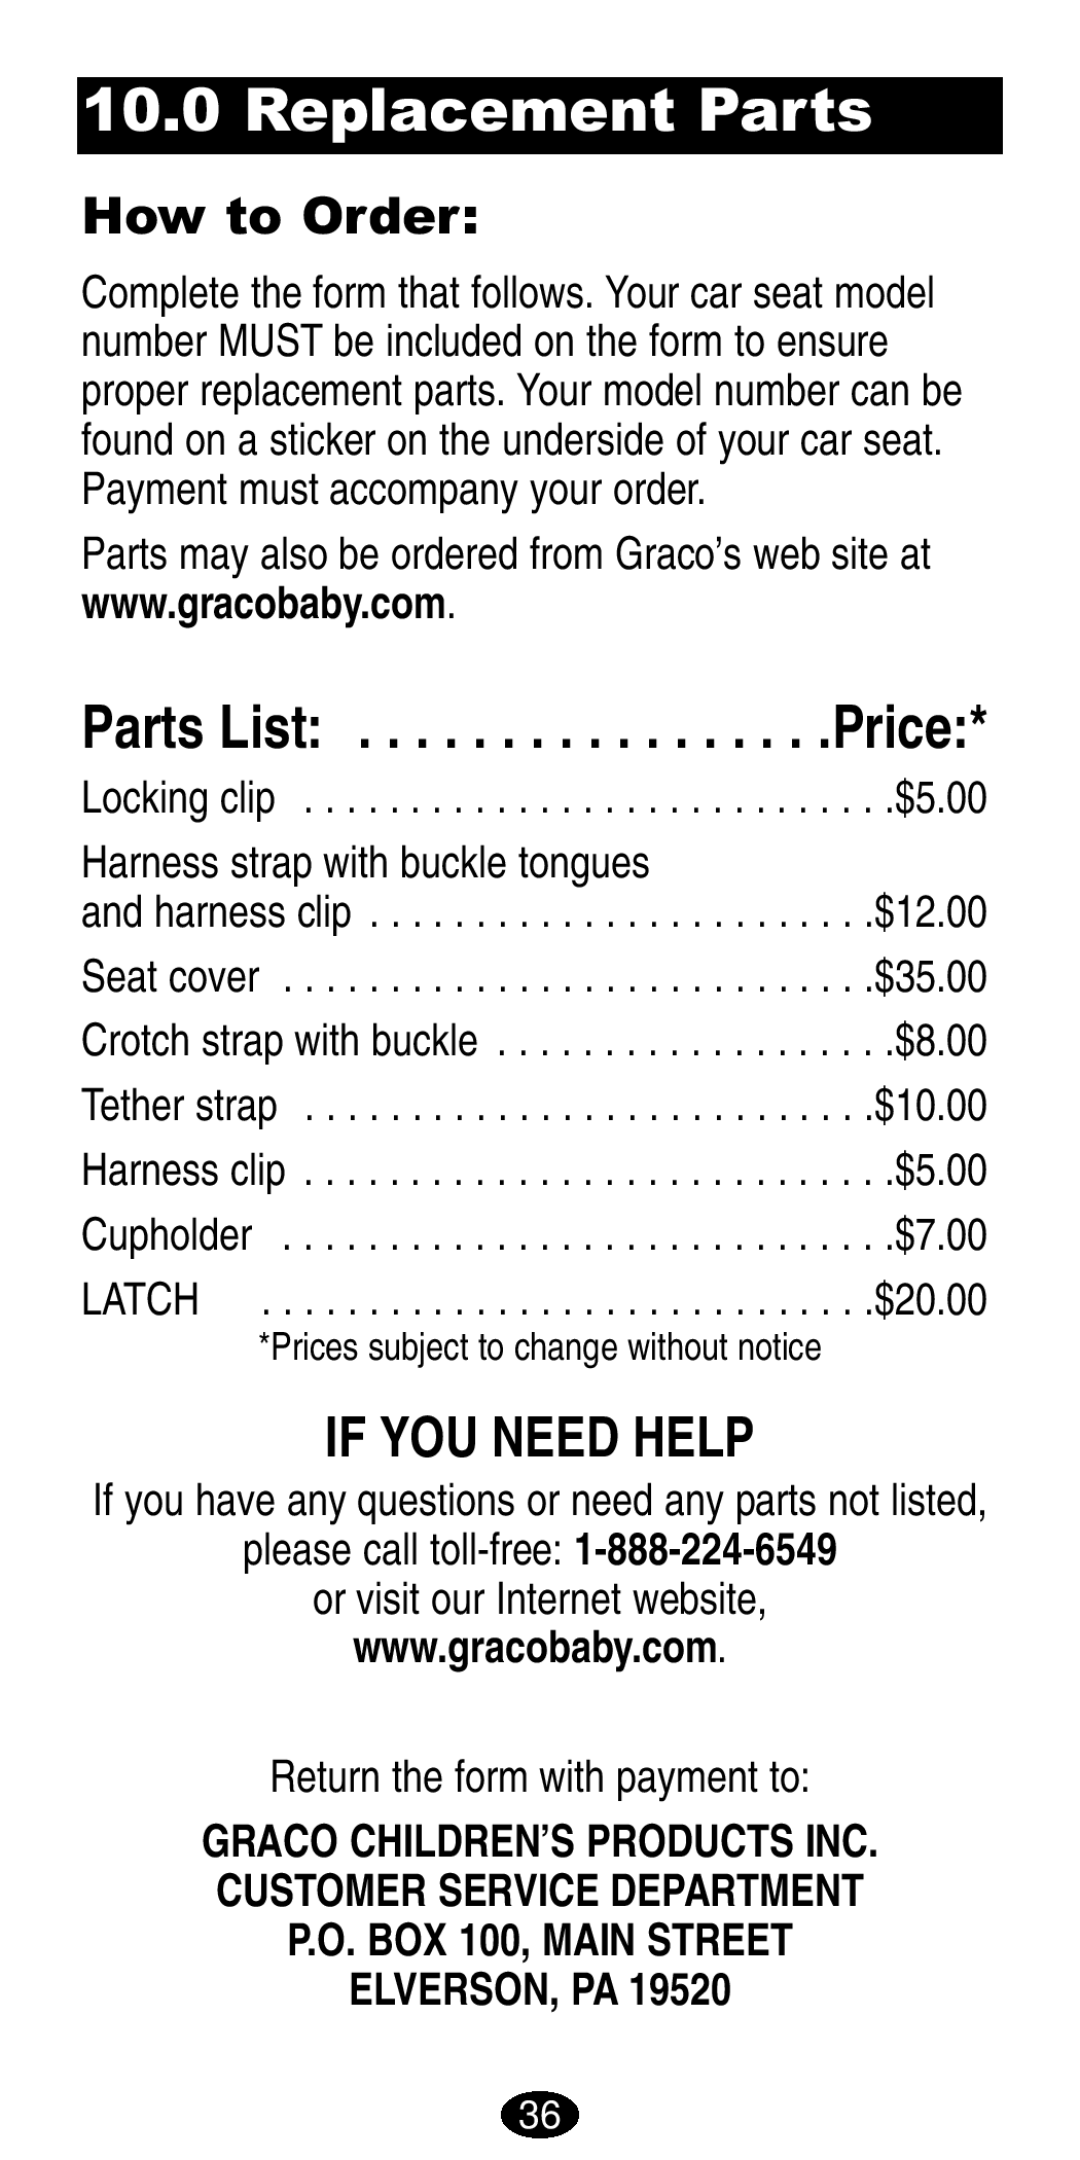 Graco 8490, 8486 manual Replacement Parts, Parts List . . . . . . . . . . . . . . . . .Price, If You Need Help, How to Order 